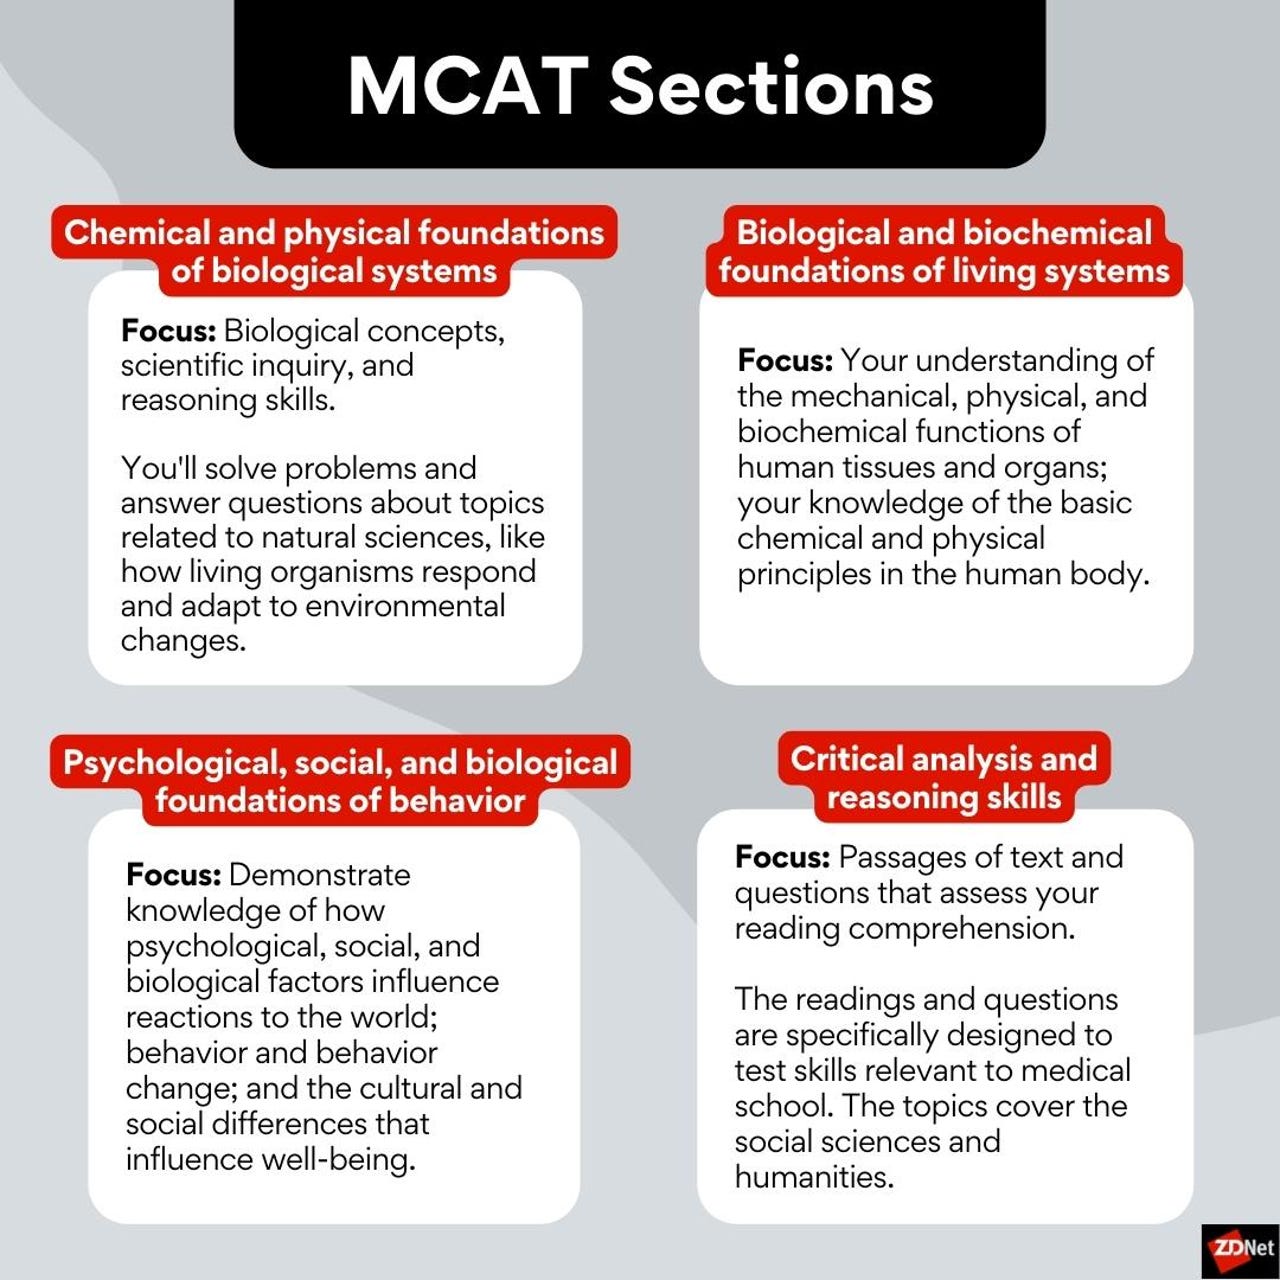 Graphic summarizing the below four MCAT sections.